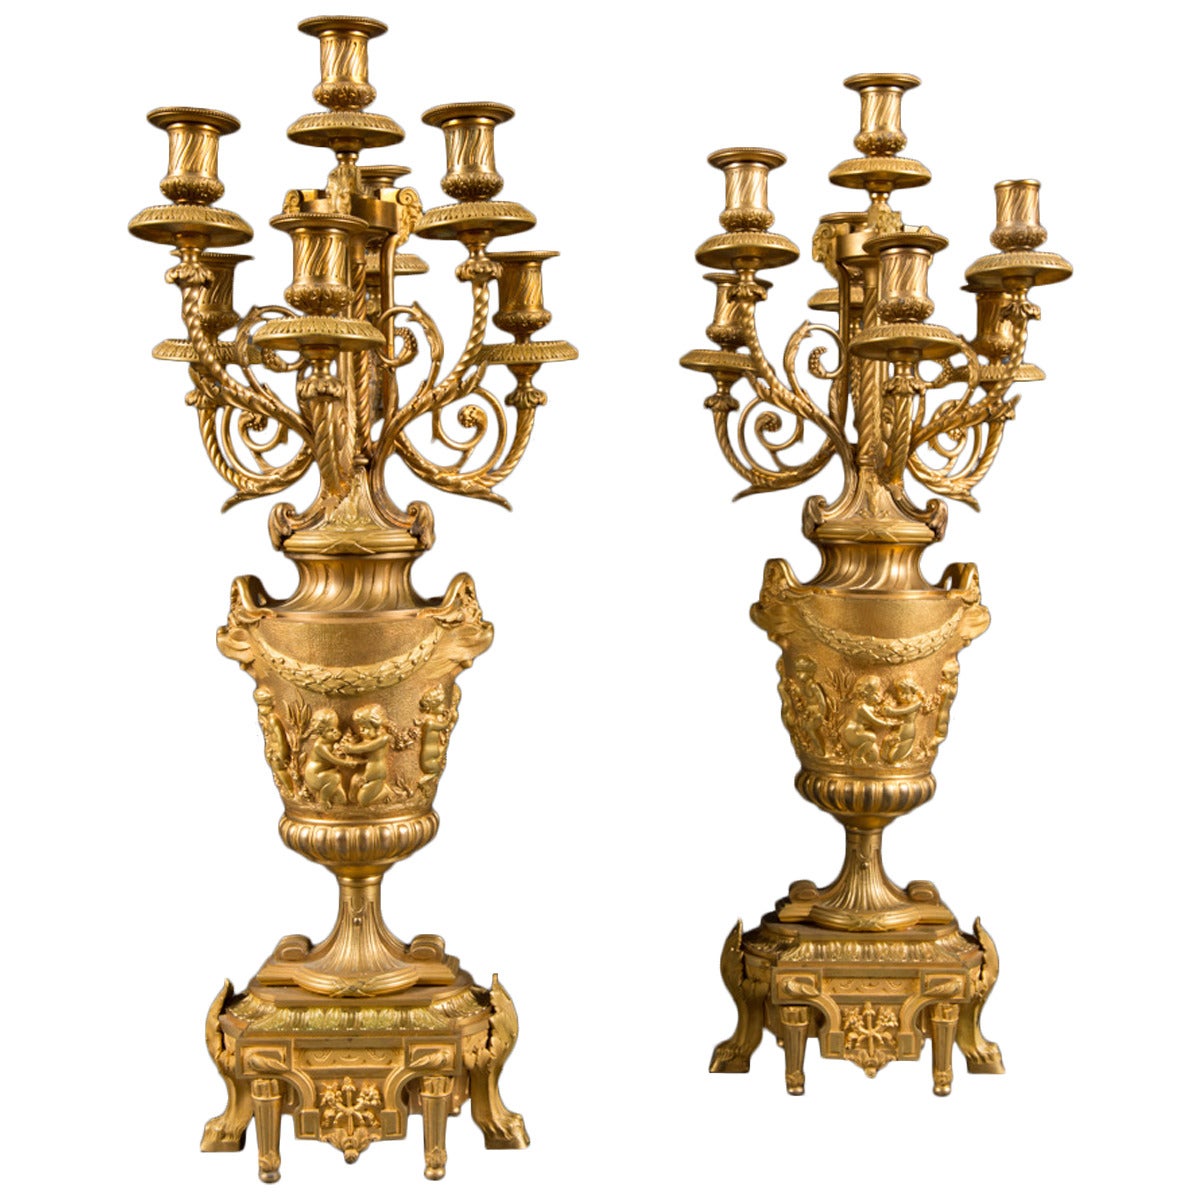 A Pair of 19th Century French ormolu Candelabras attr. to F. Barbedienne For Sale